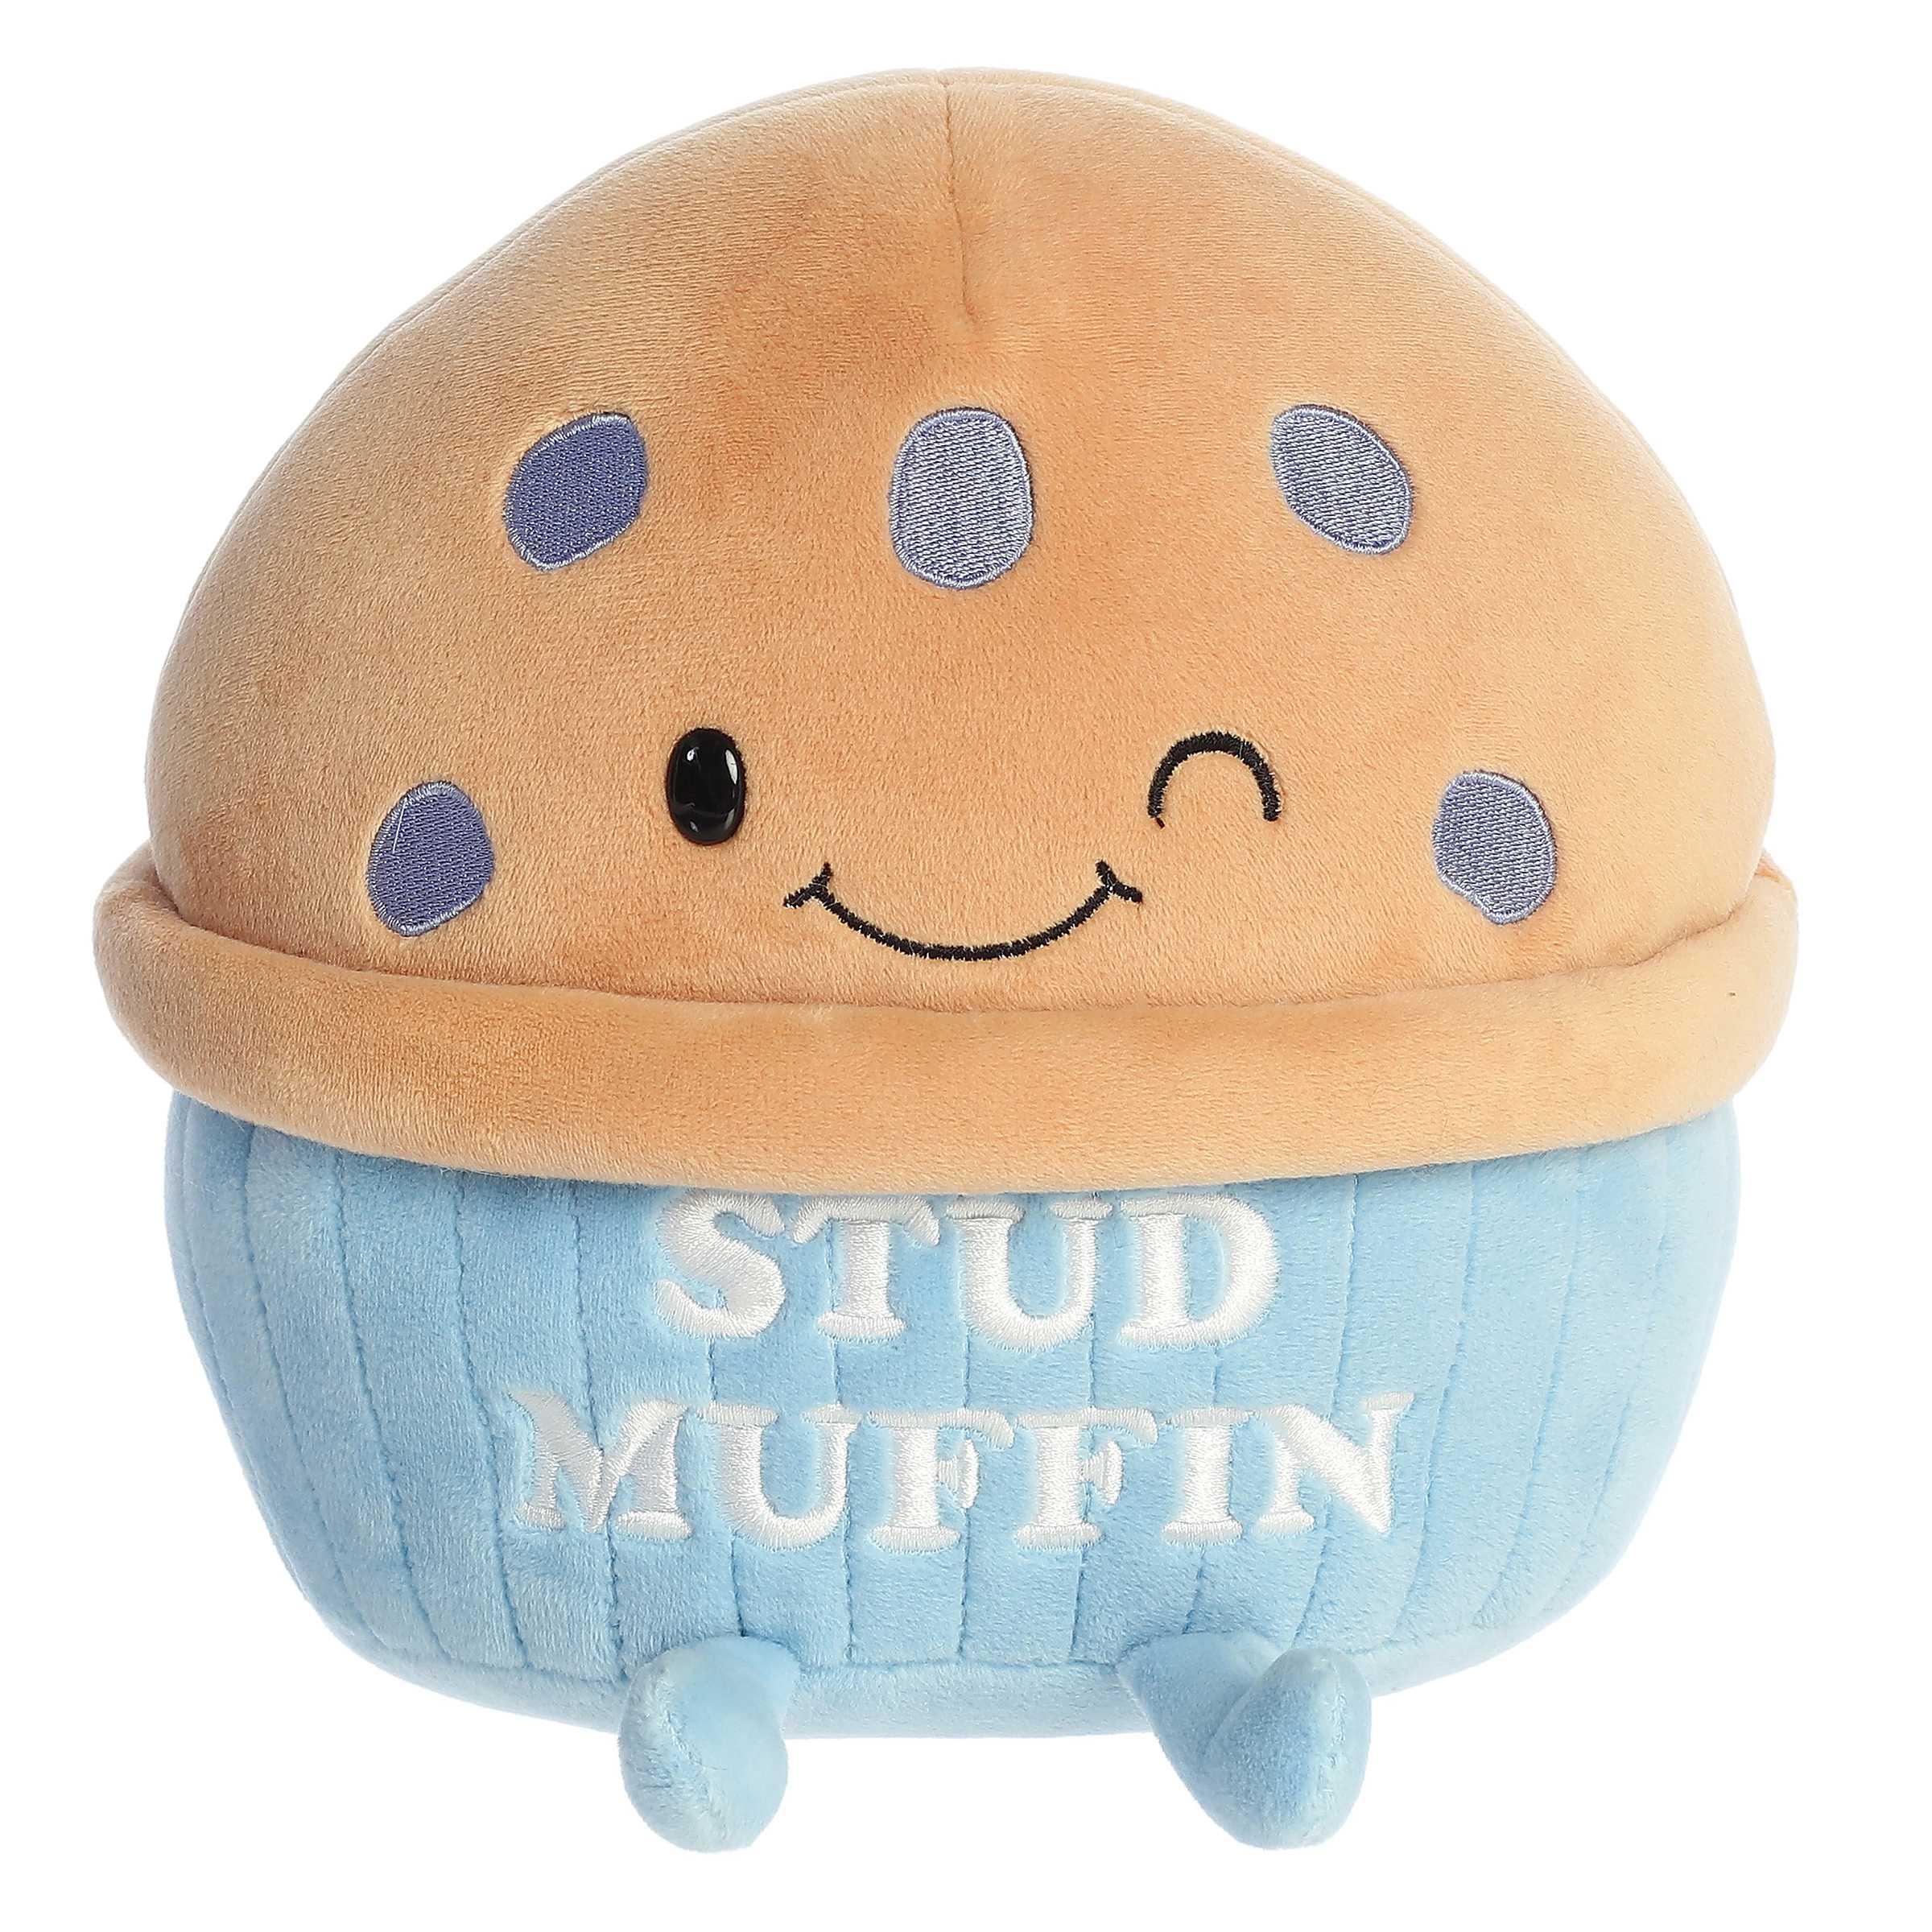 Stud Muffin plush from Just Sayin', with a cute saying and playful design, soft and charming for brightening days.